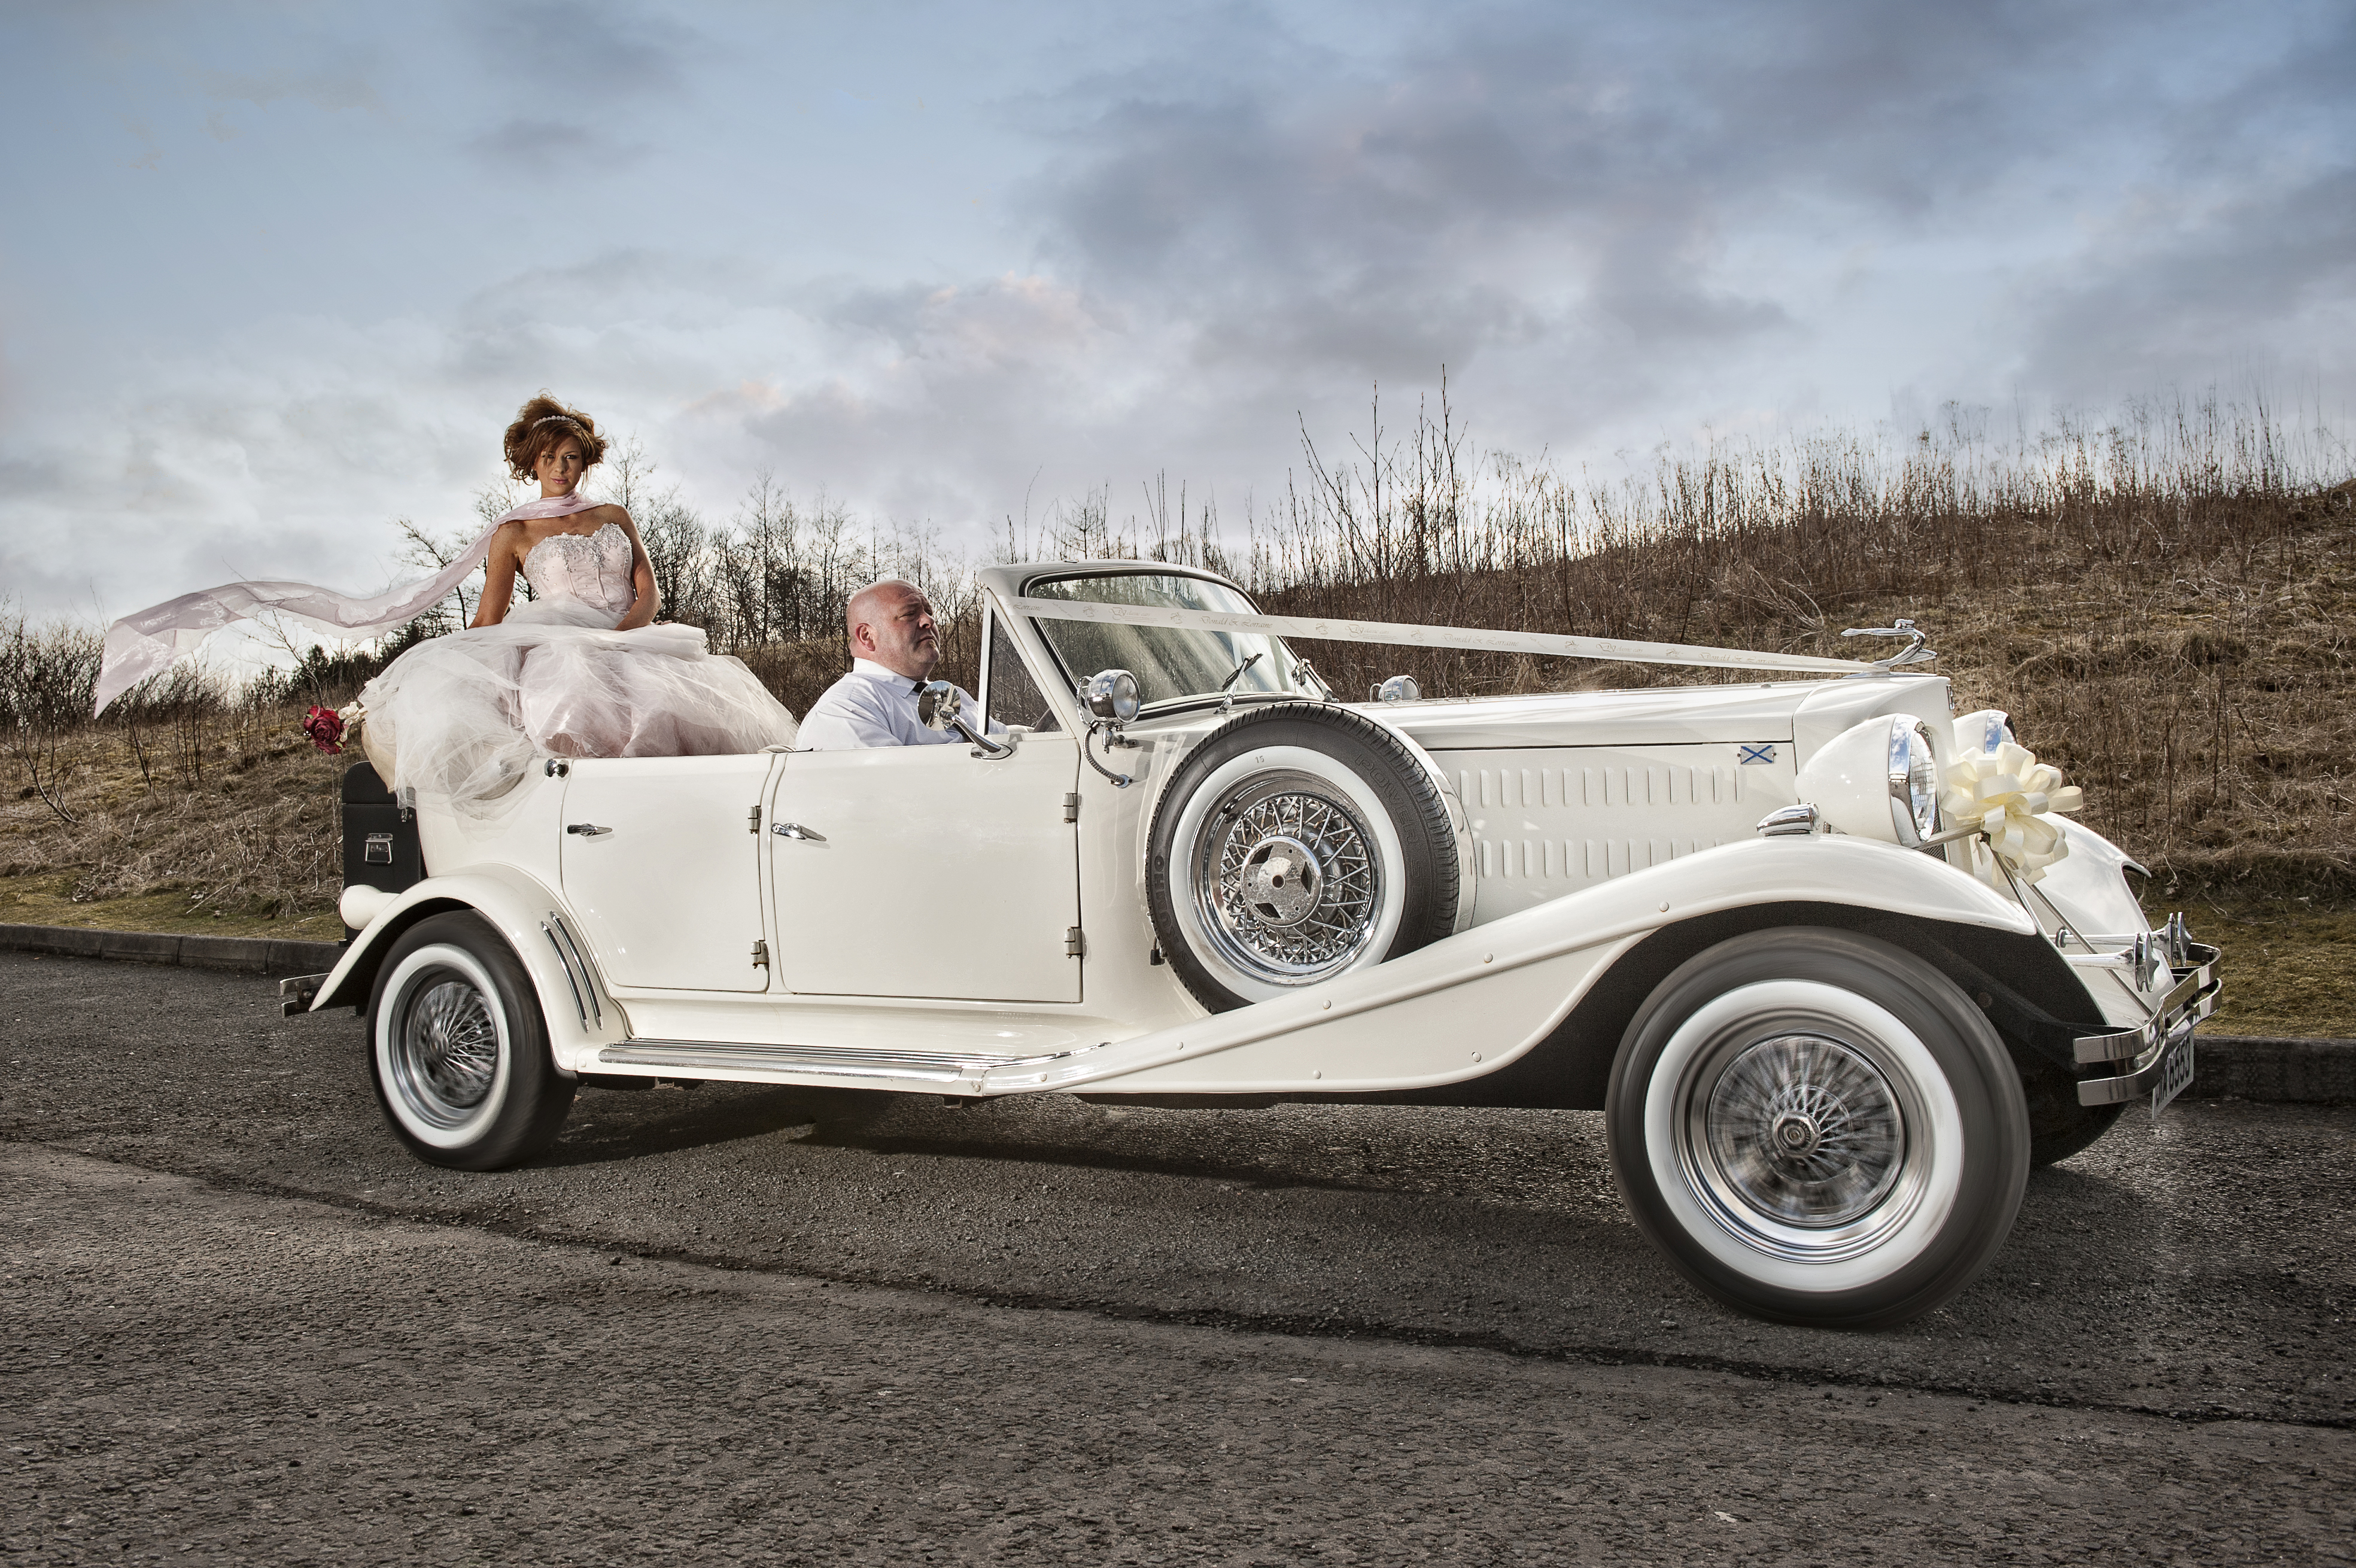 The beauford